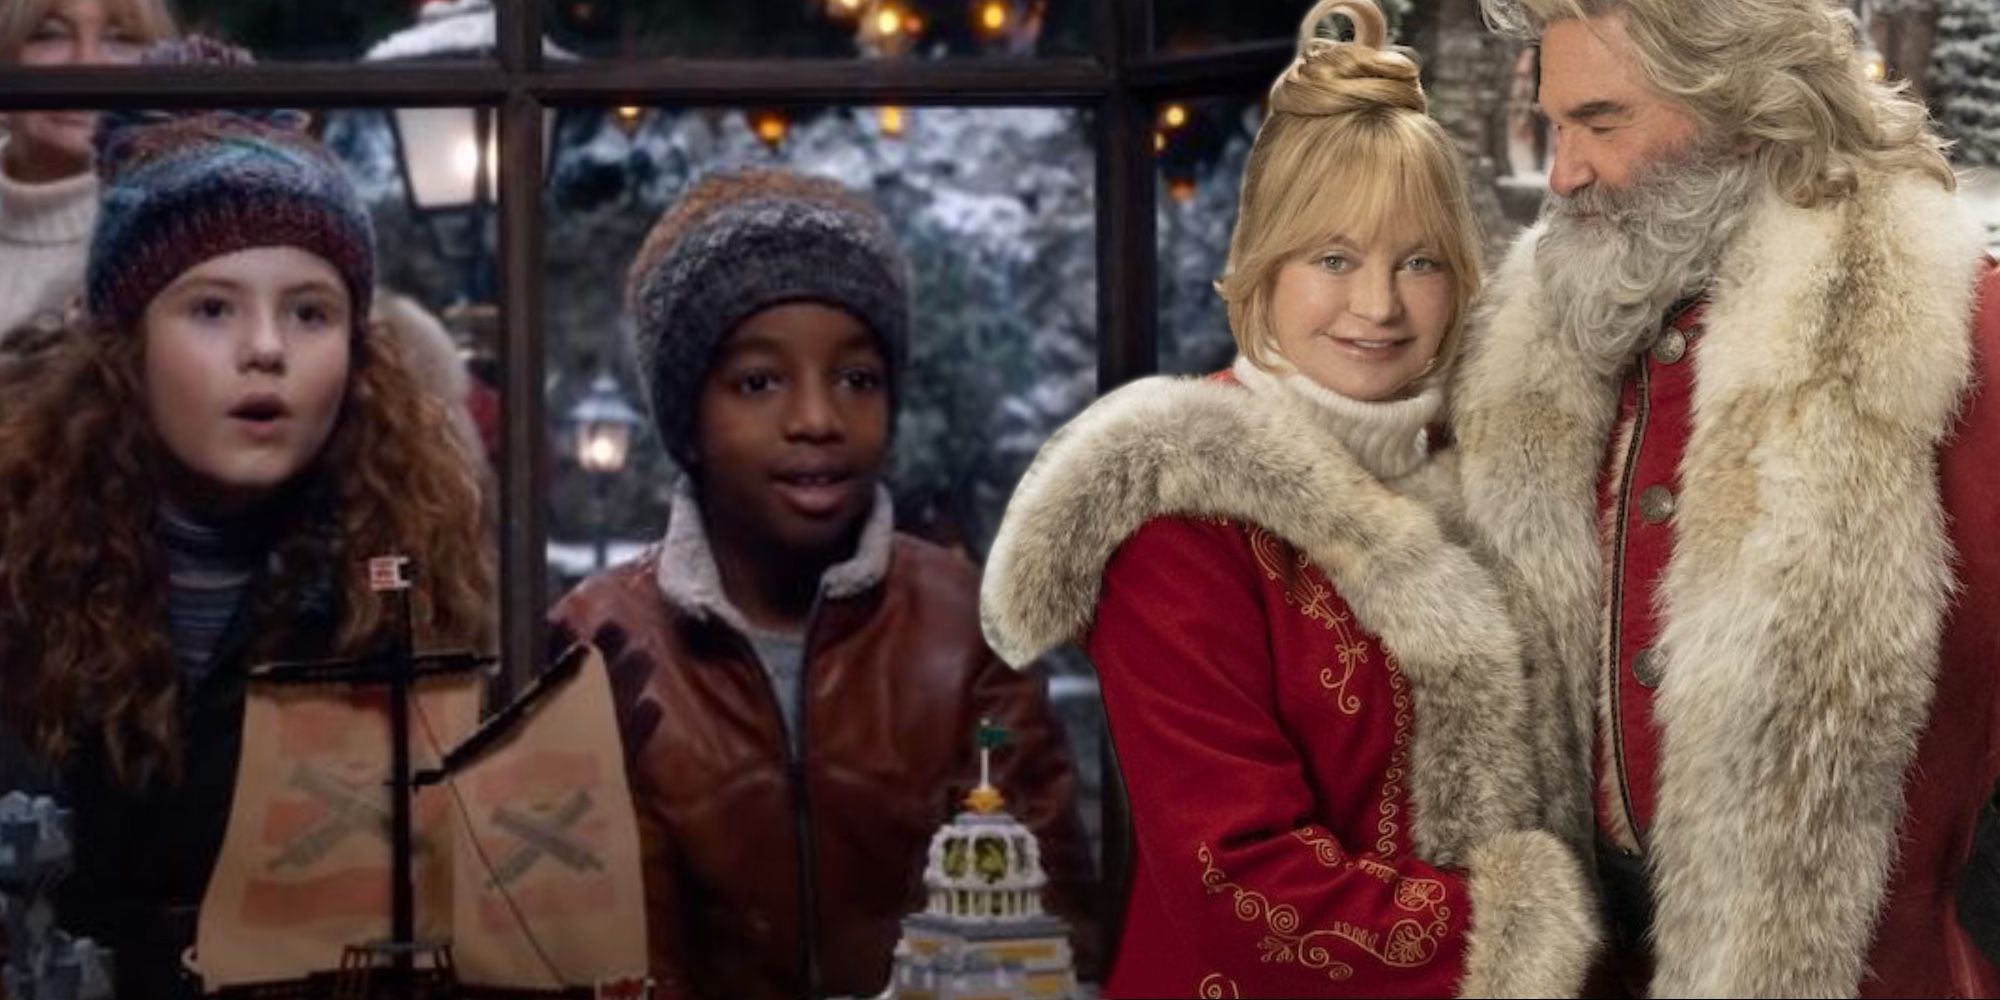 Kate Jack Santa and Mrs. Claus in The Christmas Chronicles 2